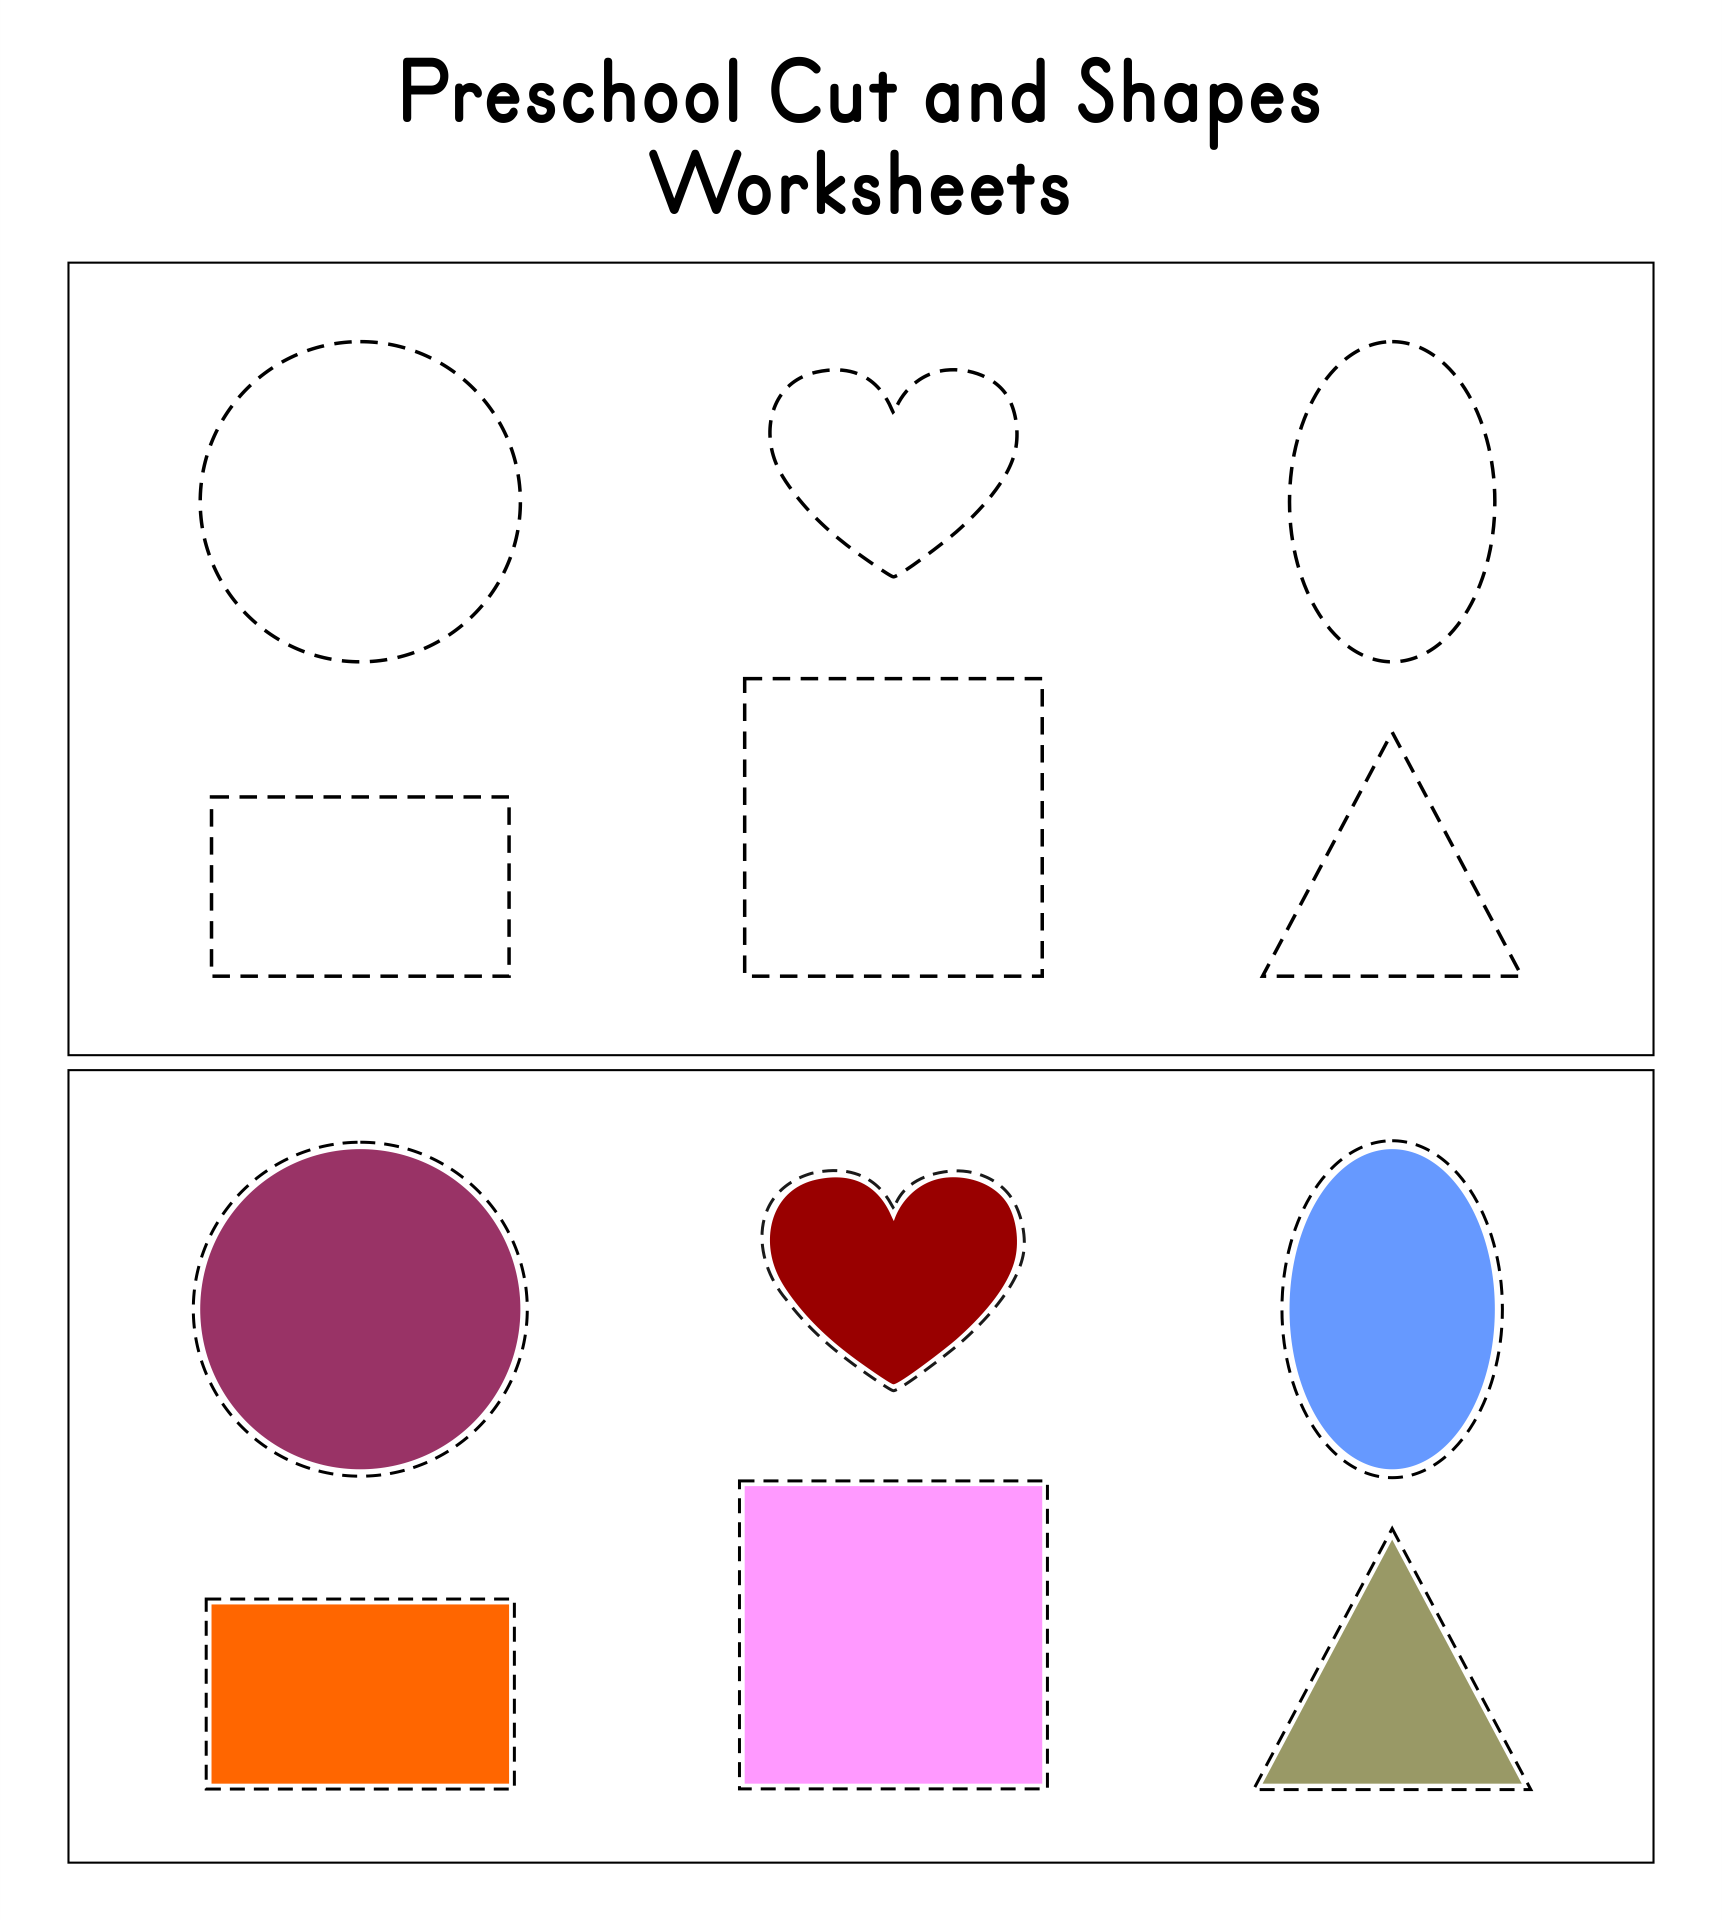 cut-out-shapes-worksheet